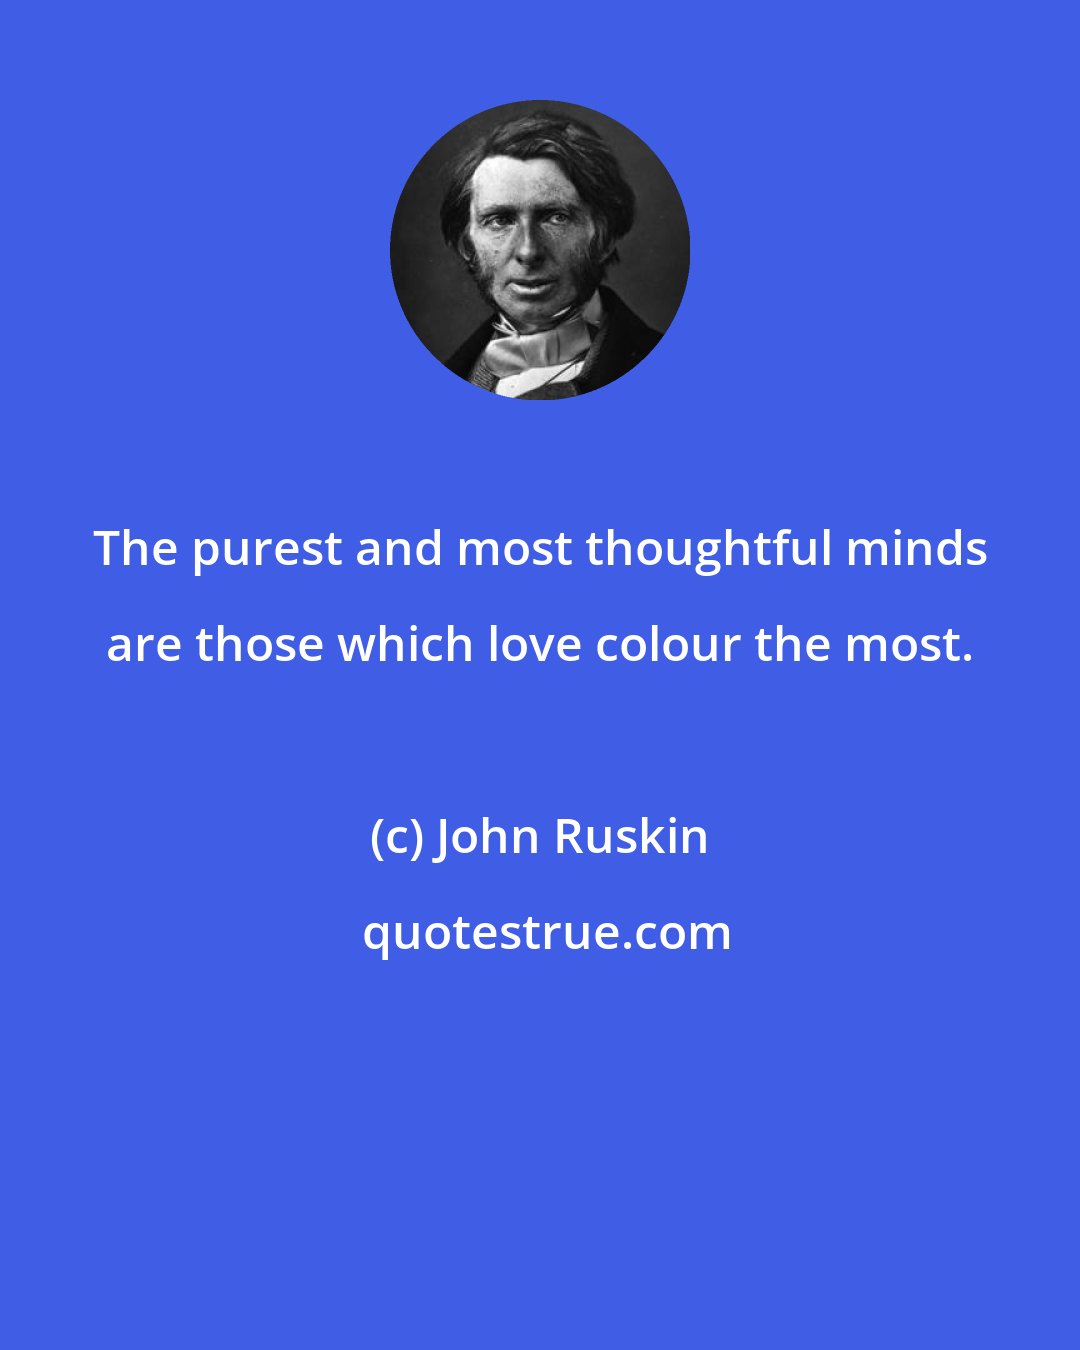 John Ruskin: The purest and most thoughtful minds are those which love colour the most.